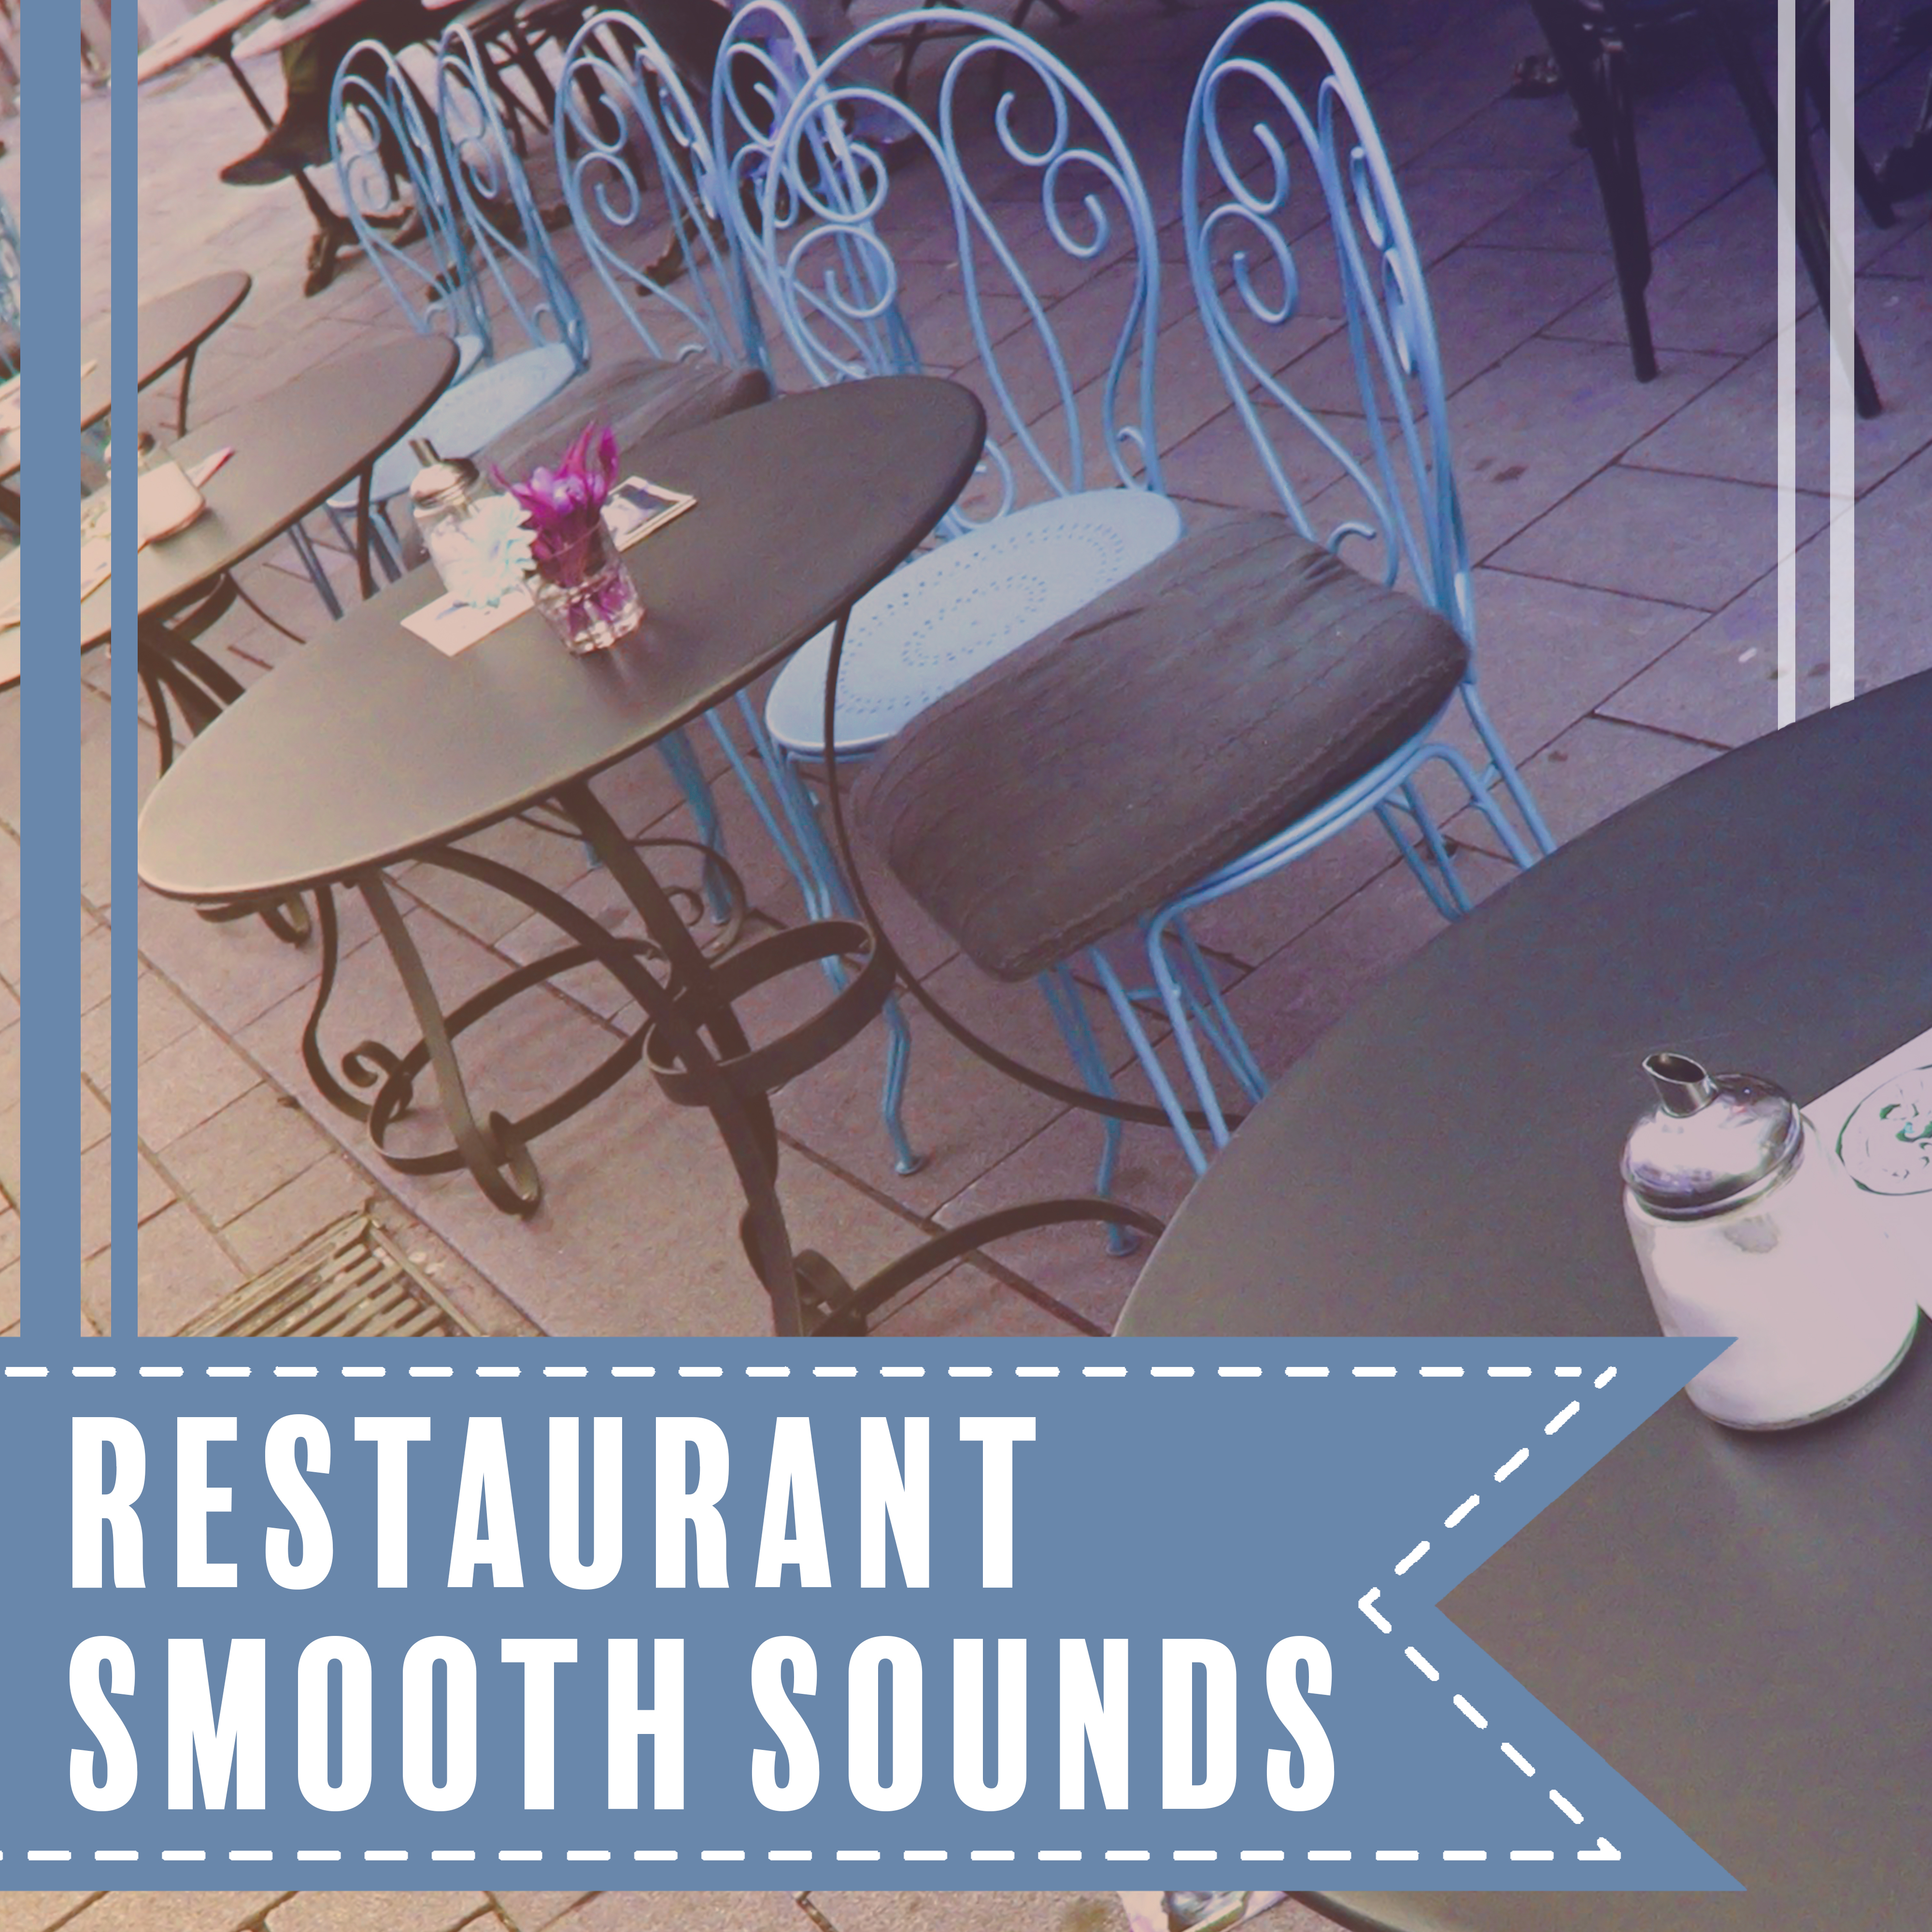 Restaurant Smooth Sounds  Jazz Cafe, Chillout, Deep Relief, Cocktail Party, Coffee Rest, Peaceful Mind, Instrumental Jazz for Relaxation